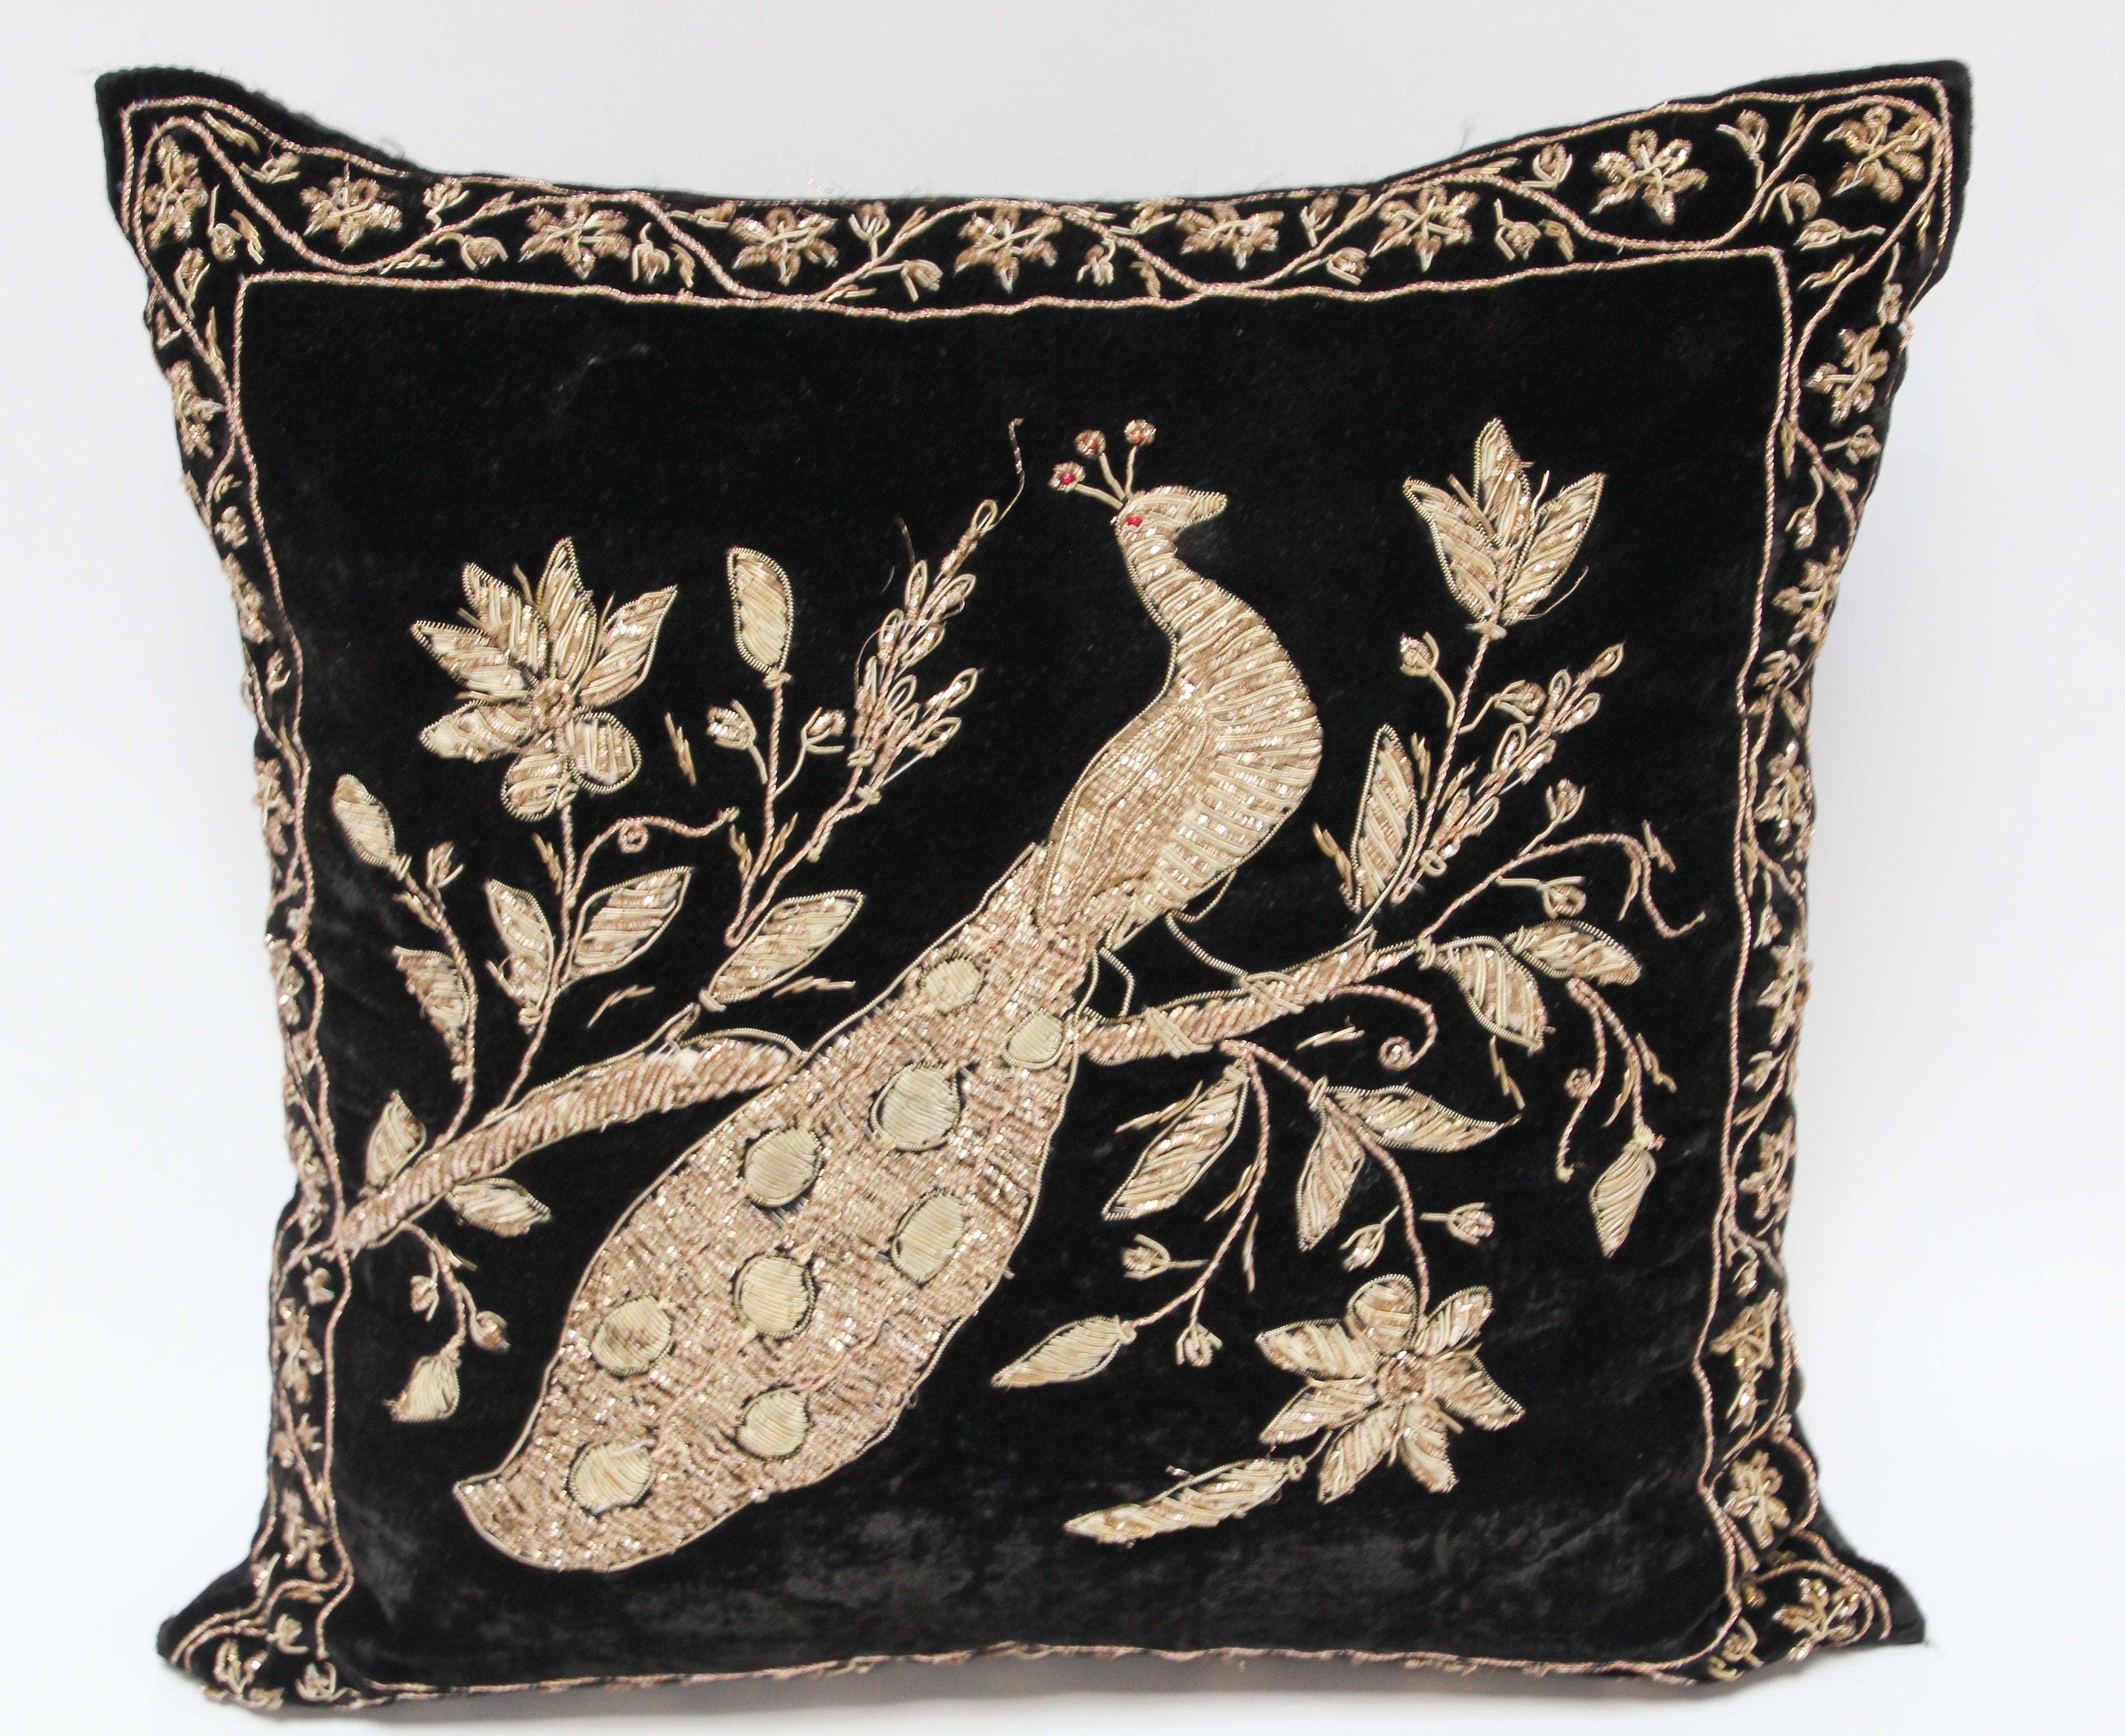 Black Moorish silk velvet pillow hand embroidered with gold metallic threads and sequins depicting a royal peacock on a branch.
Gold metallic thread embroidered with silver and ruby red with white pearls.
Handcrafted and embroidered vintage throw